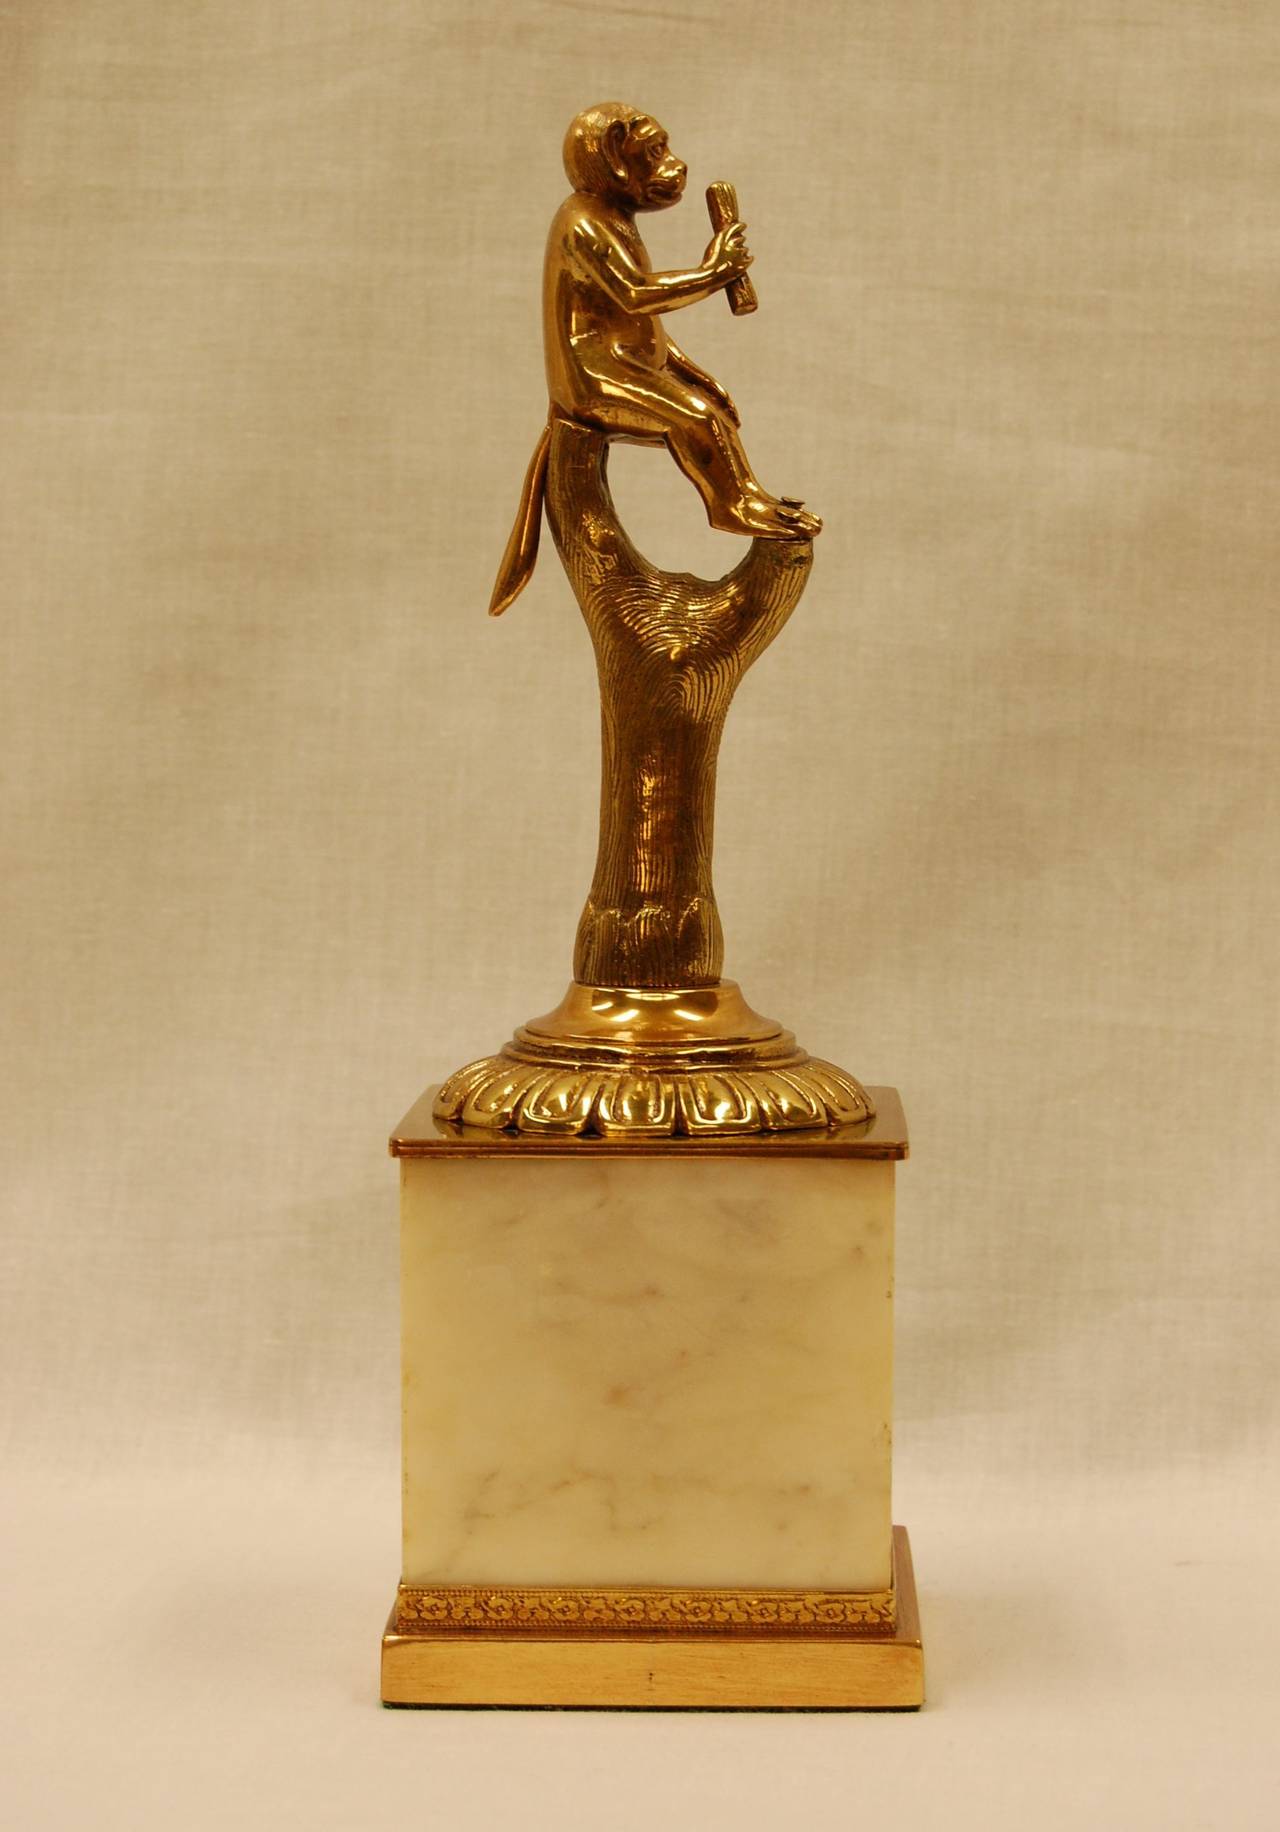 Hand-Crafted Early 19th Century Bronze Sculpture of a Monkey on Marble Plinth